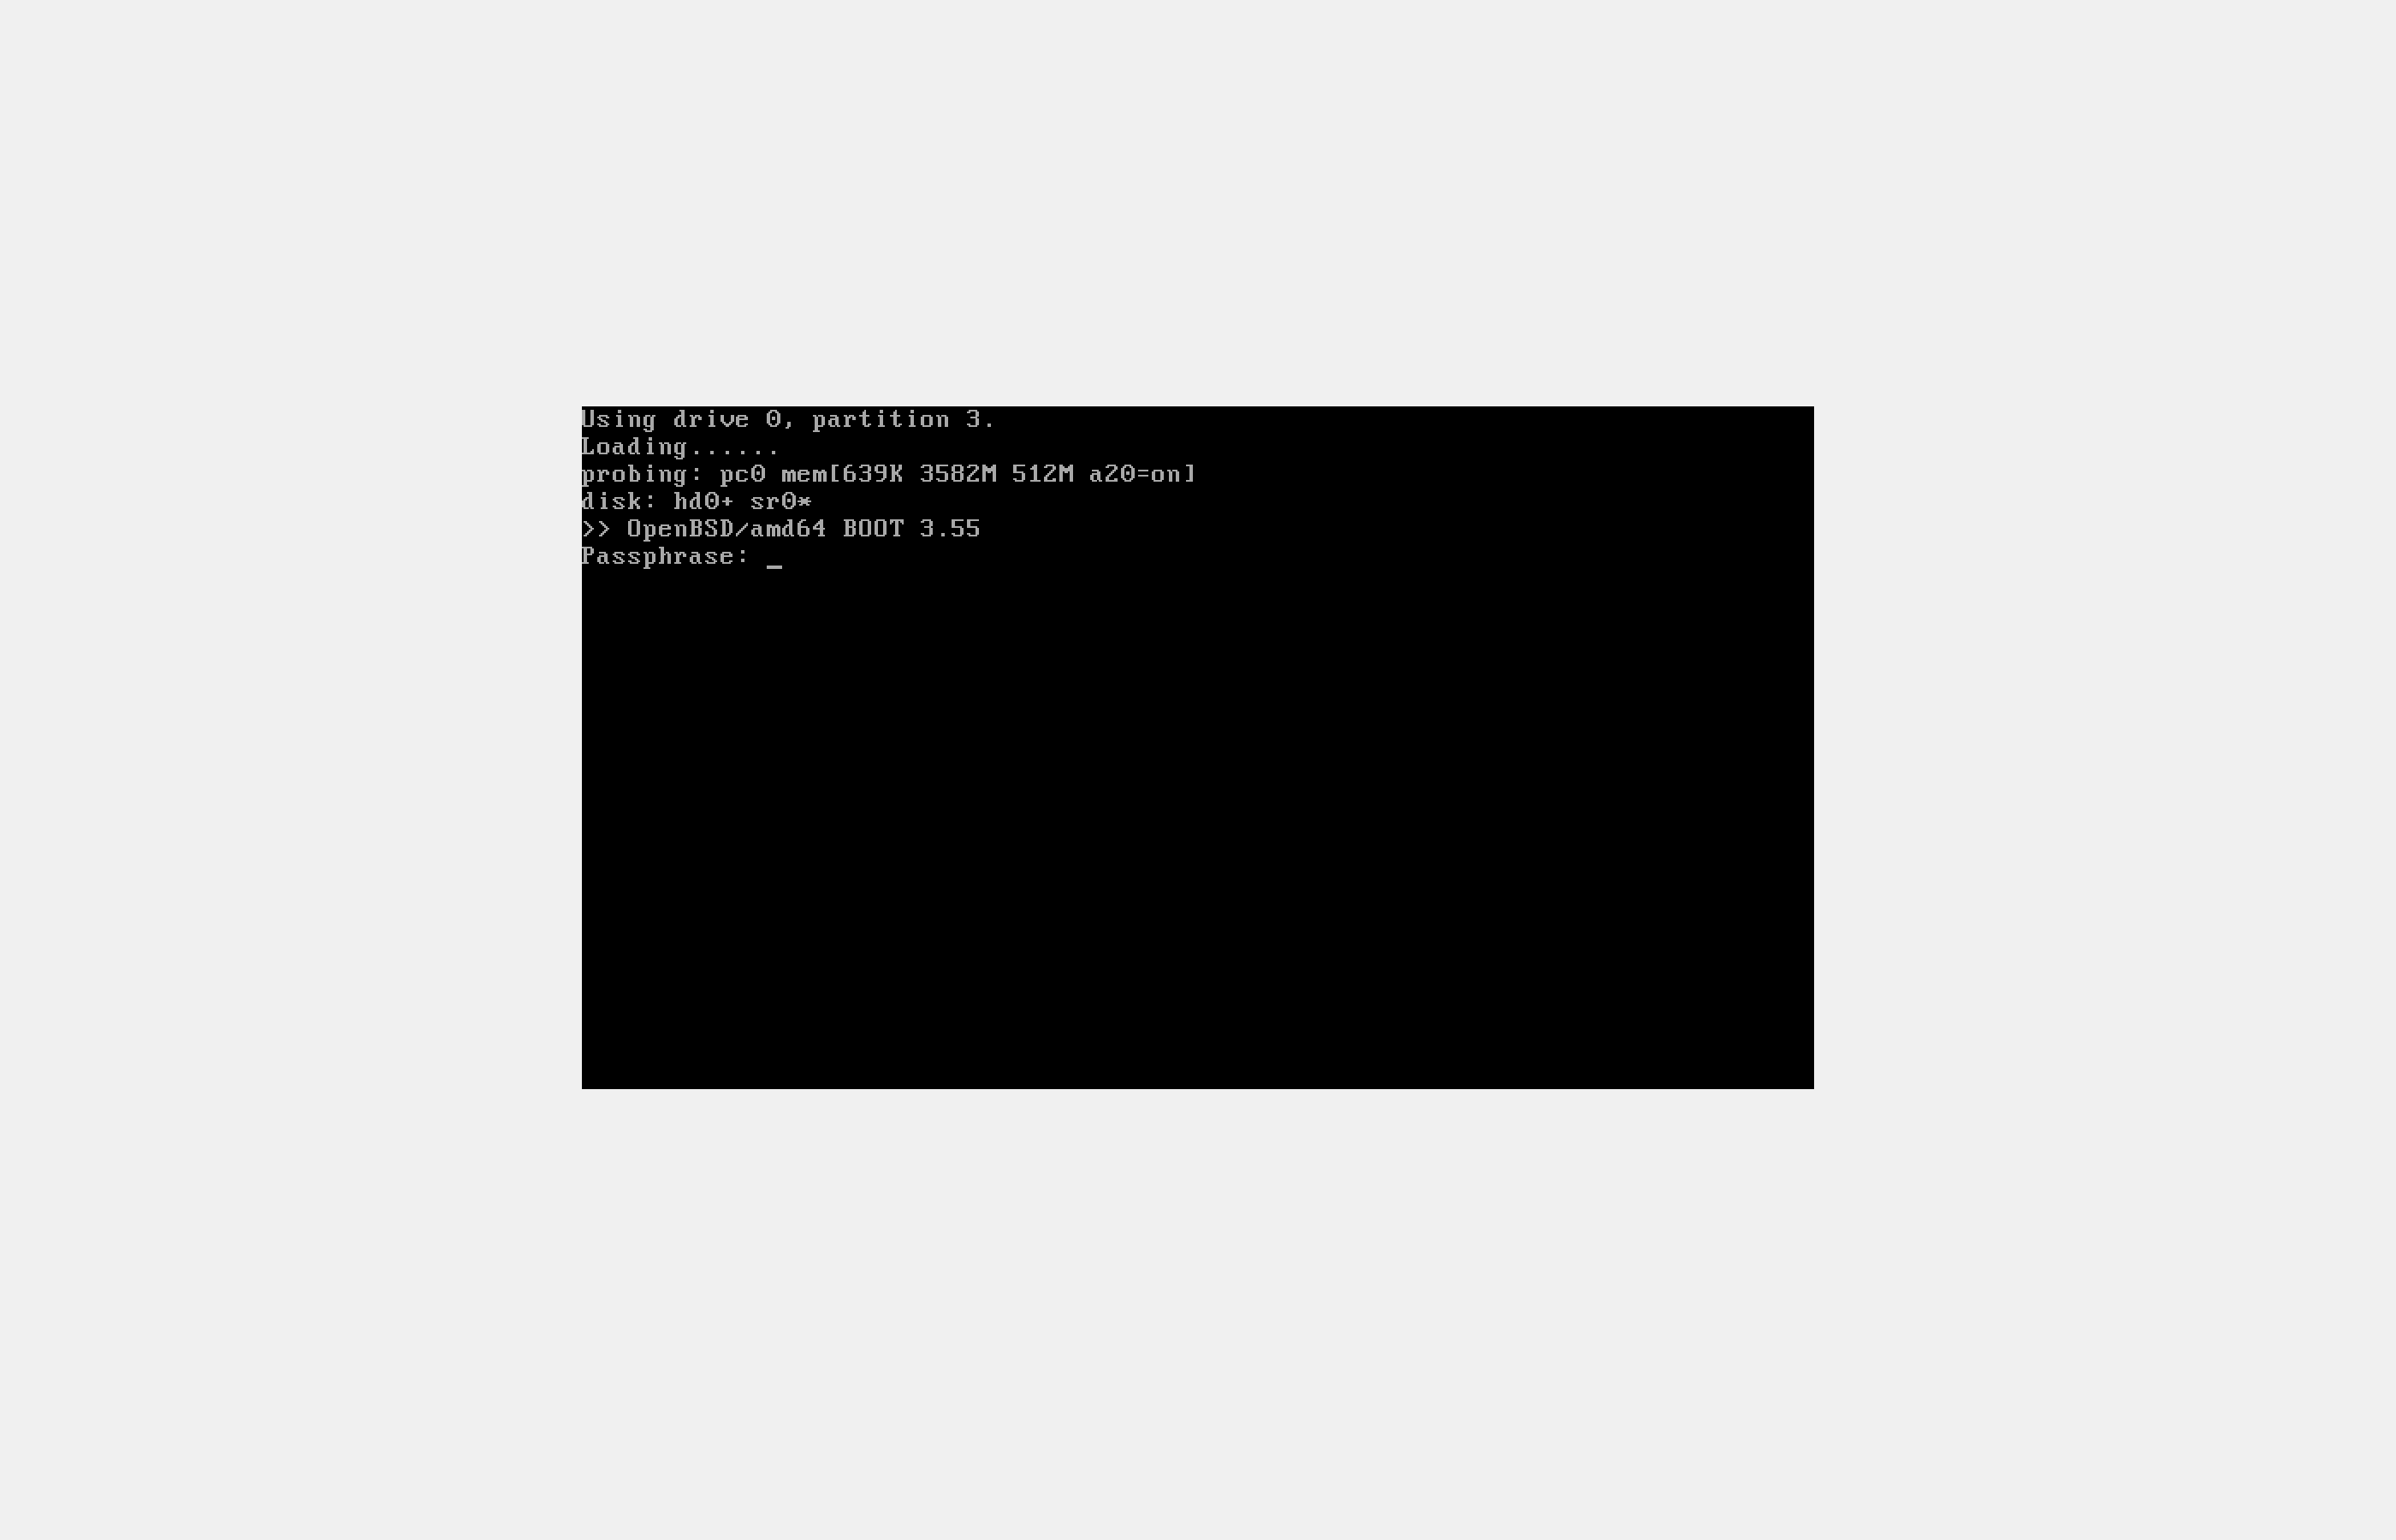 OpenHWW: OpenBSD boot. Type your passphrase for a SOFTRAID encrypted disk